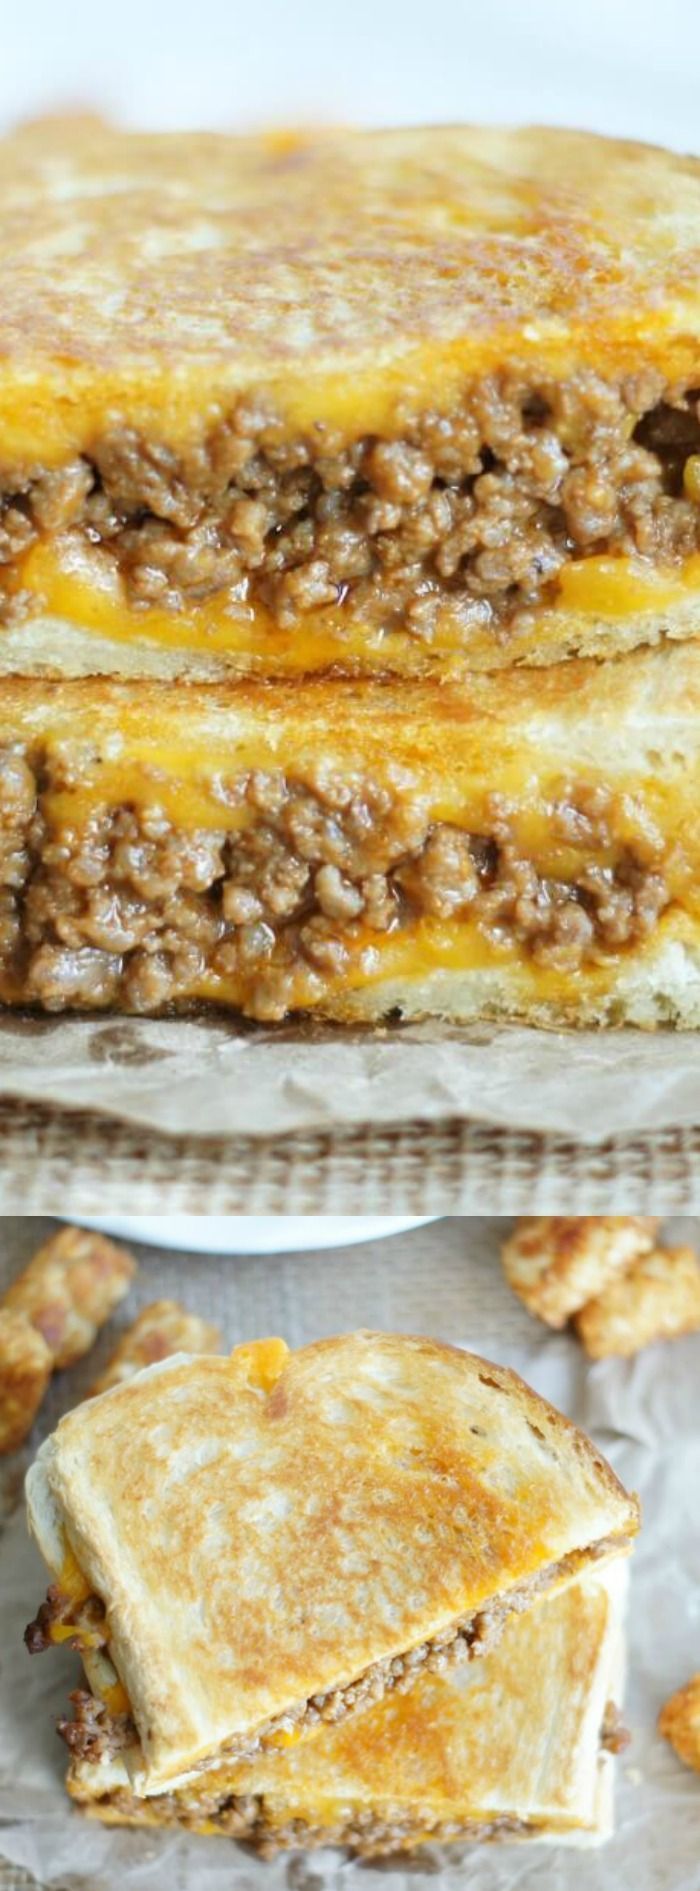 These Sloppy Joe Grilled Cheese Sandwiches from 5 Boys Baker are bound to become your new quick and easy weeknight go-to meal when